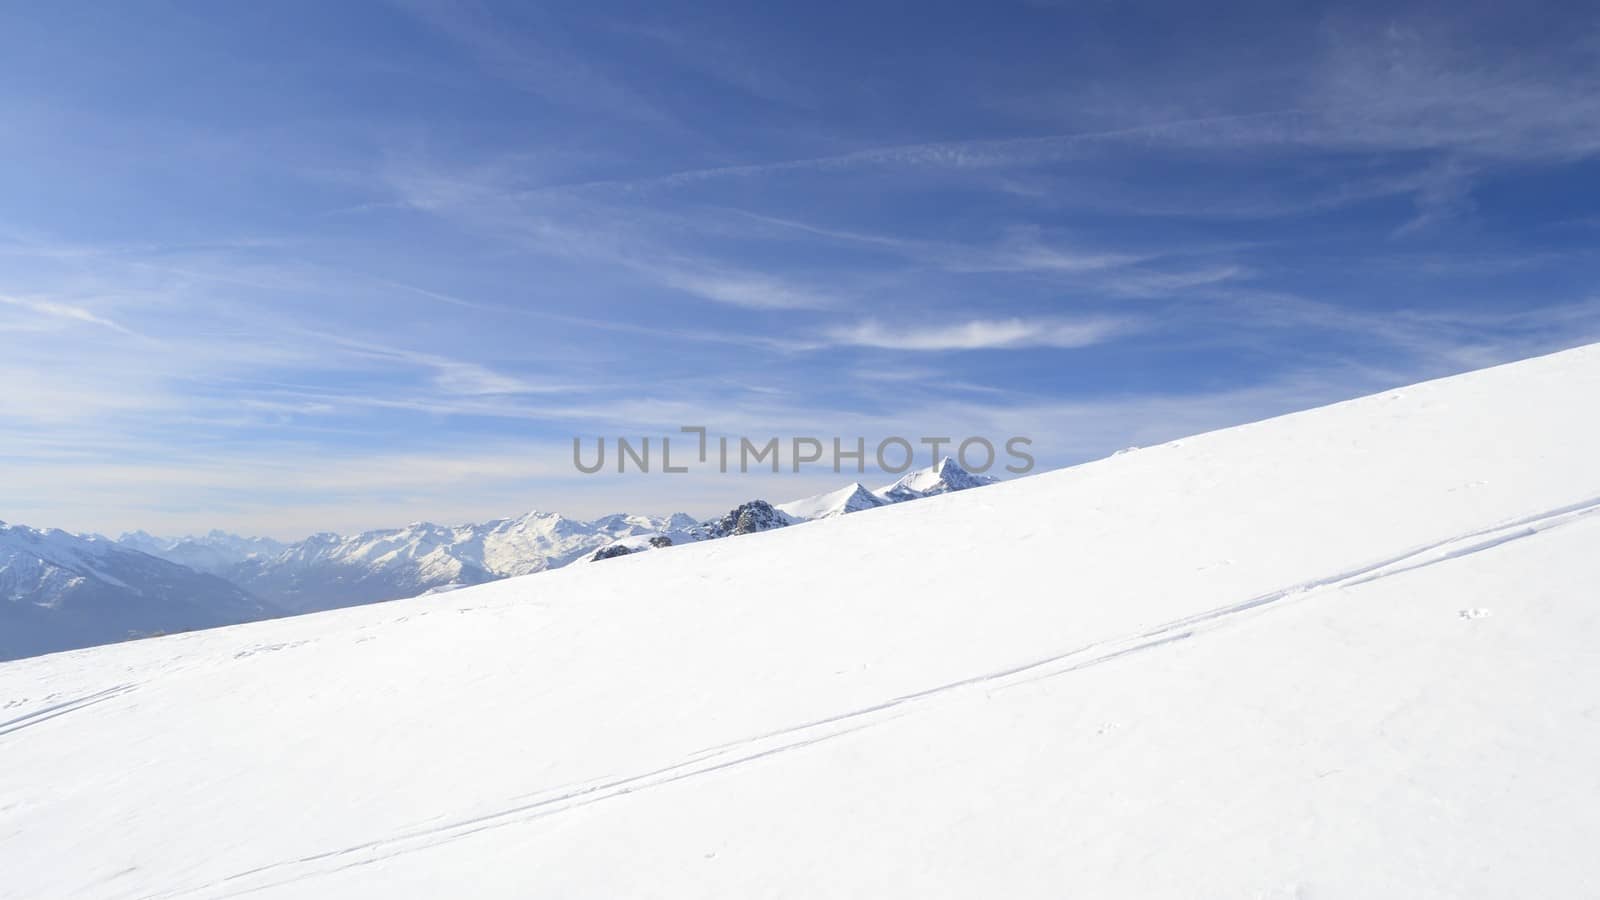 Candid off-piste ski slope in scenic background of mountain peaks, valleys and plain. Piedmont, Italian Alps